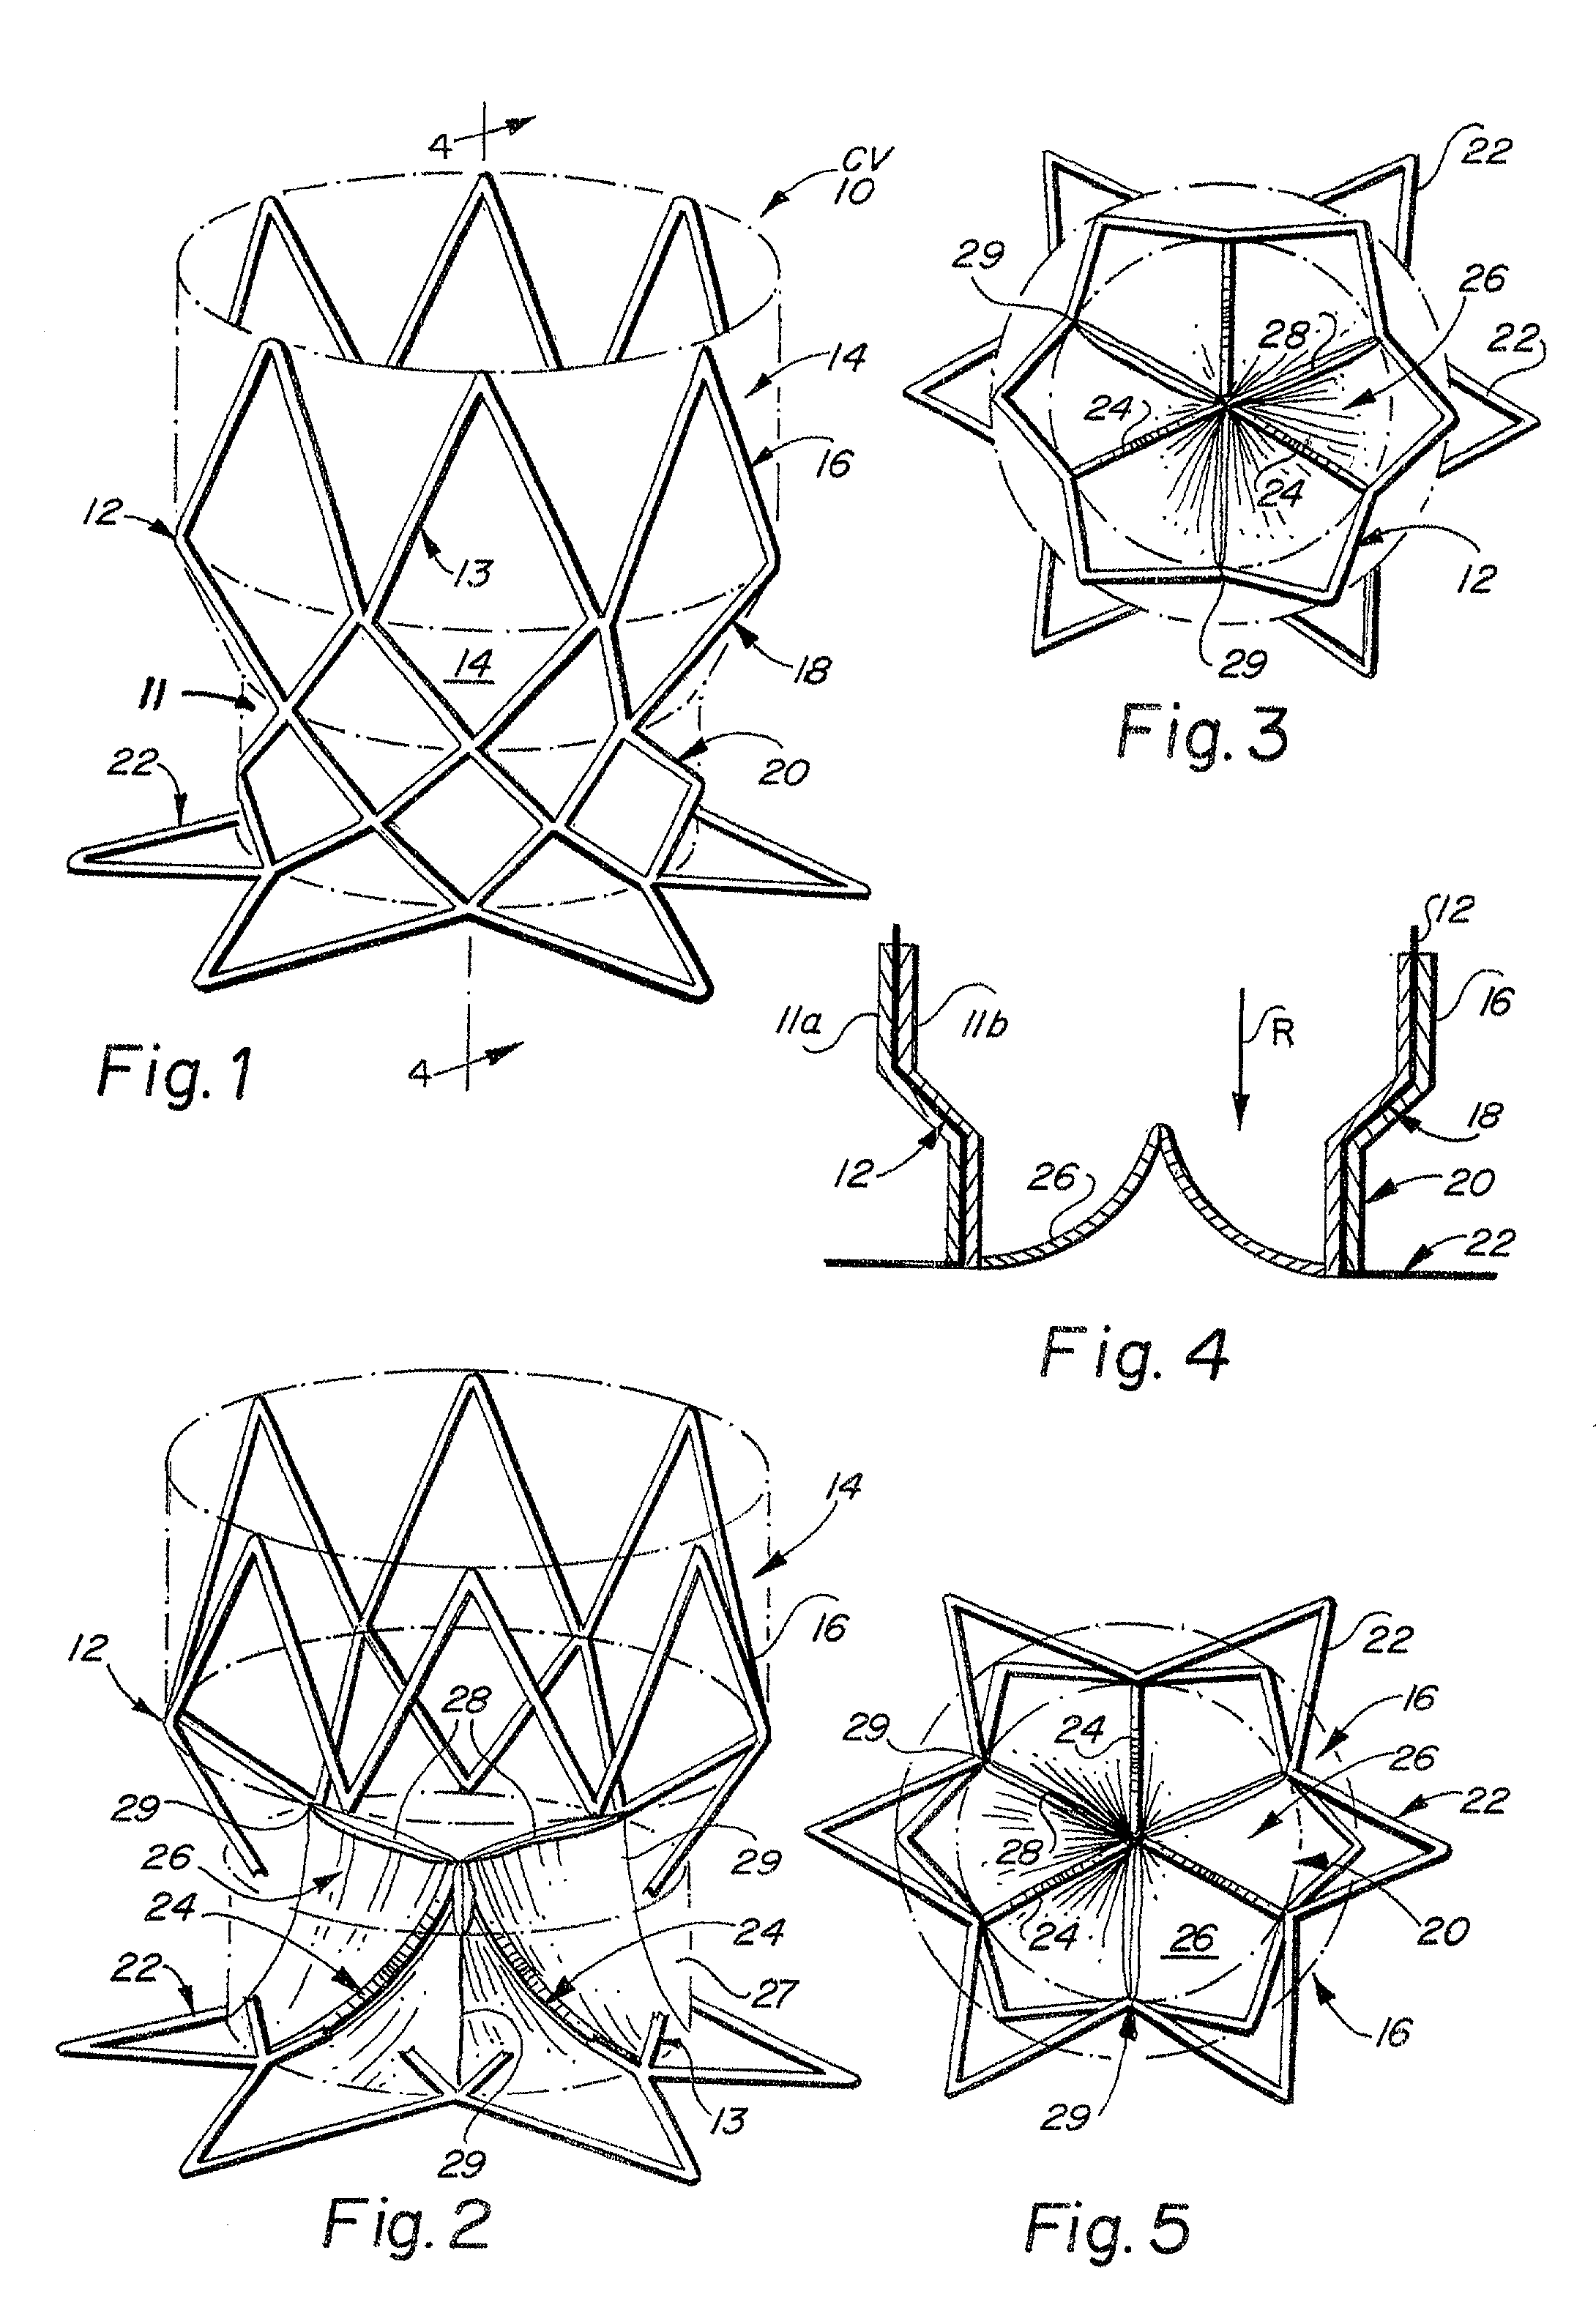 Valvular prostheses having metal or pseudometallic construction and methods of manufacture